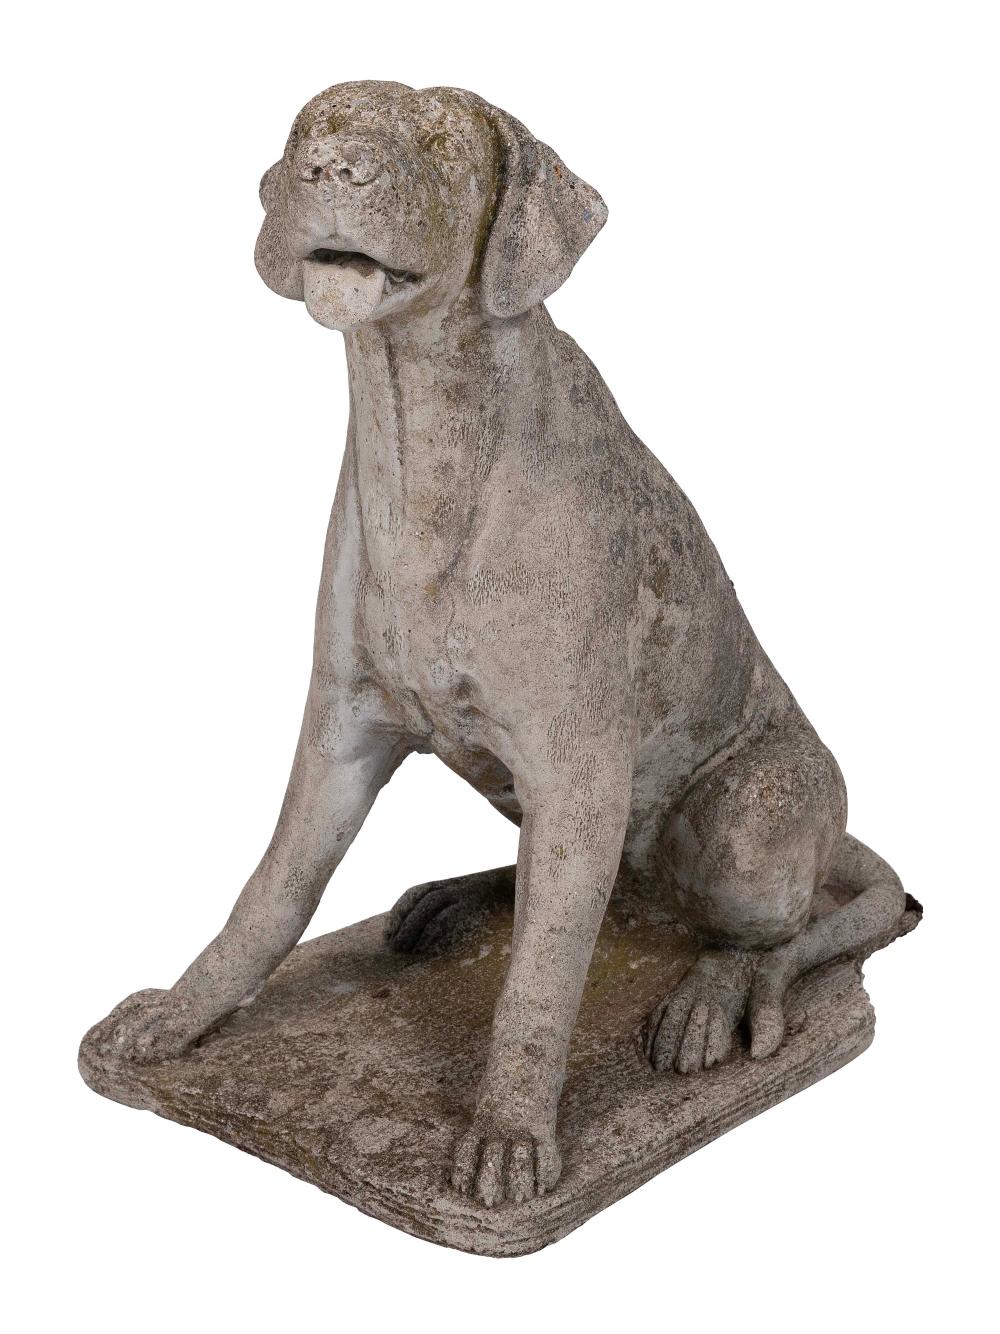 GARDEN STATUE OF A SEATED DOG 20TH 2f14f8